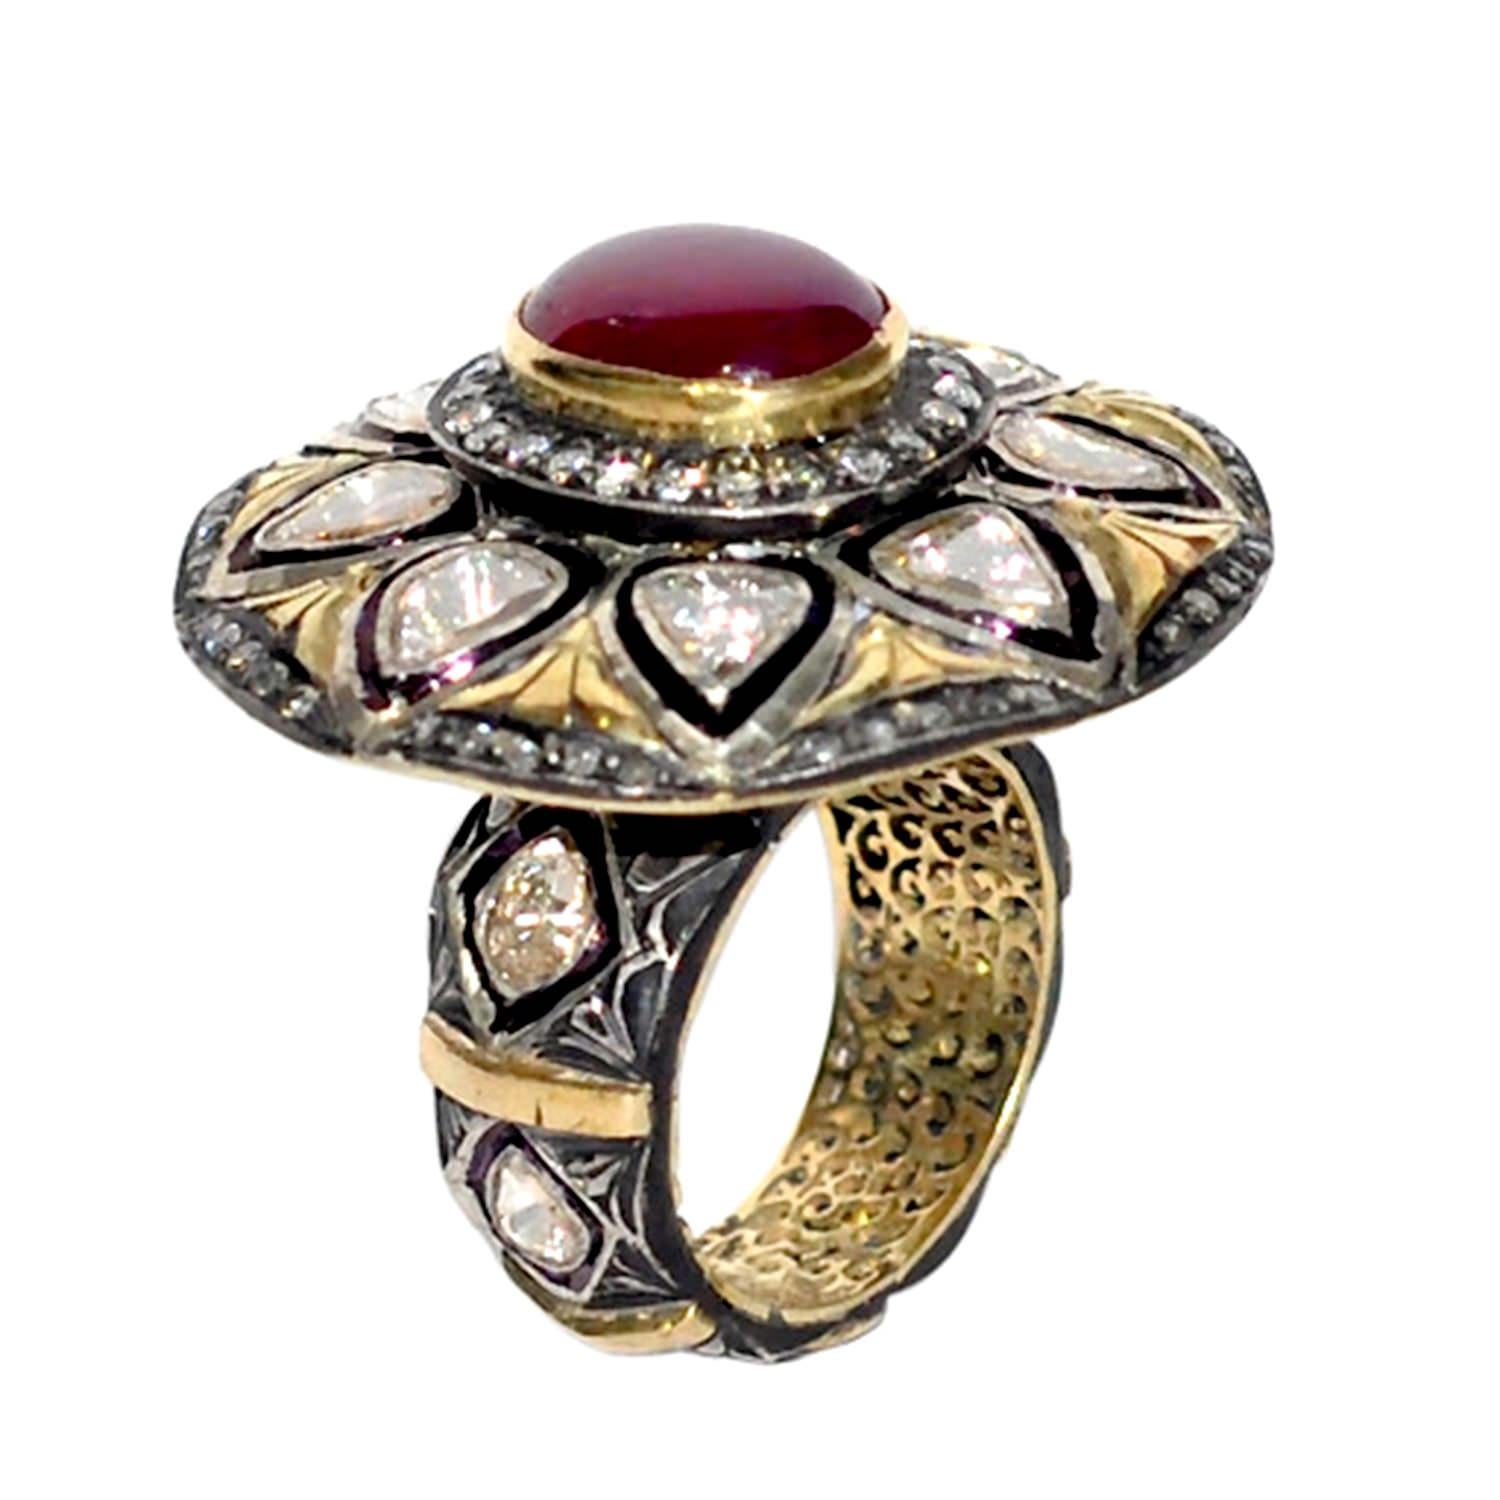 Lovely oval cocktail ring with cabochon ruby in center with polki diamonds around can be noticed from far. This ring is made with 14K yellow gold and silver.

Ring Size: 6.5

14Kt: 8.73gms
Diamond: 2.22cts
RUBY: 5.58Cts 